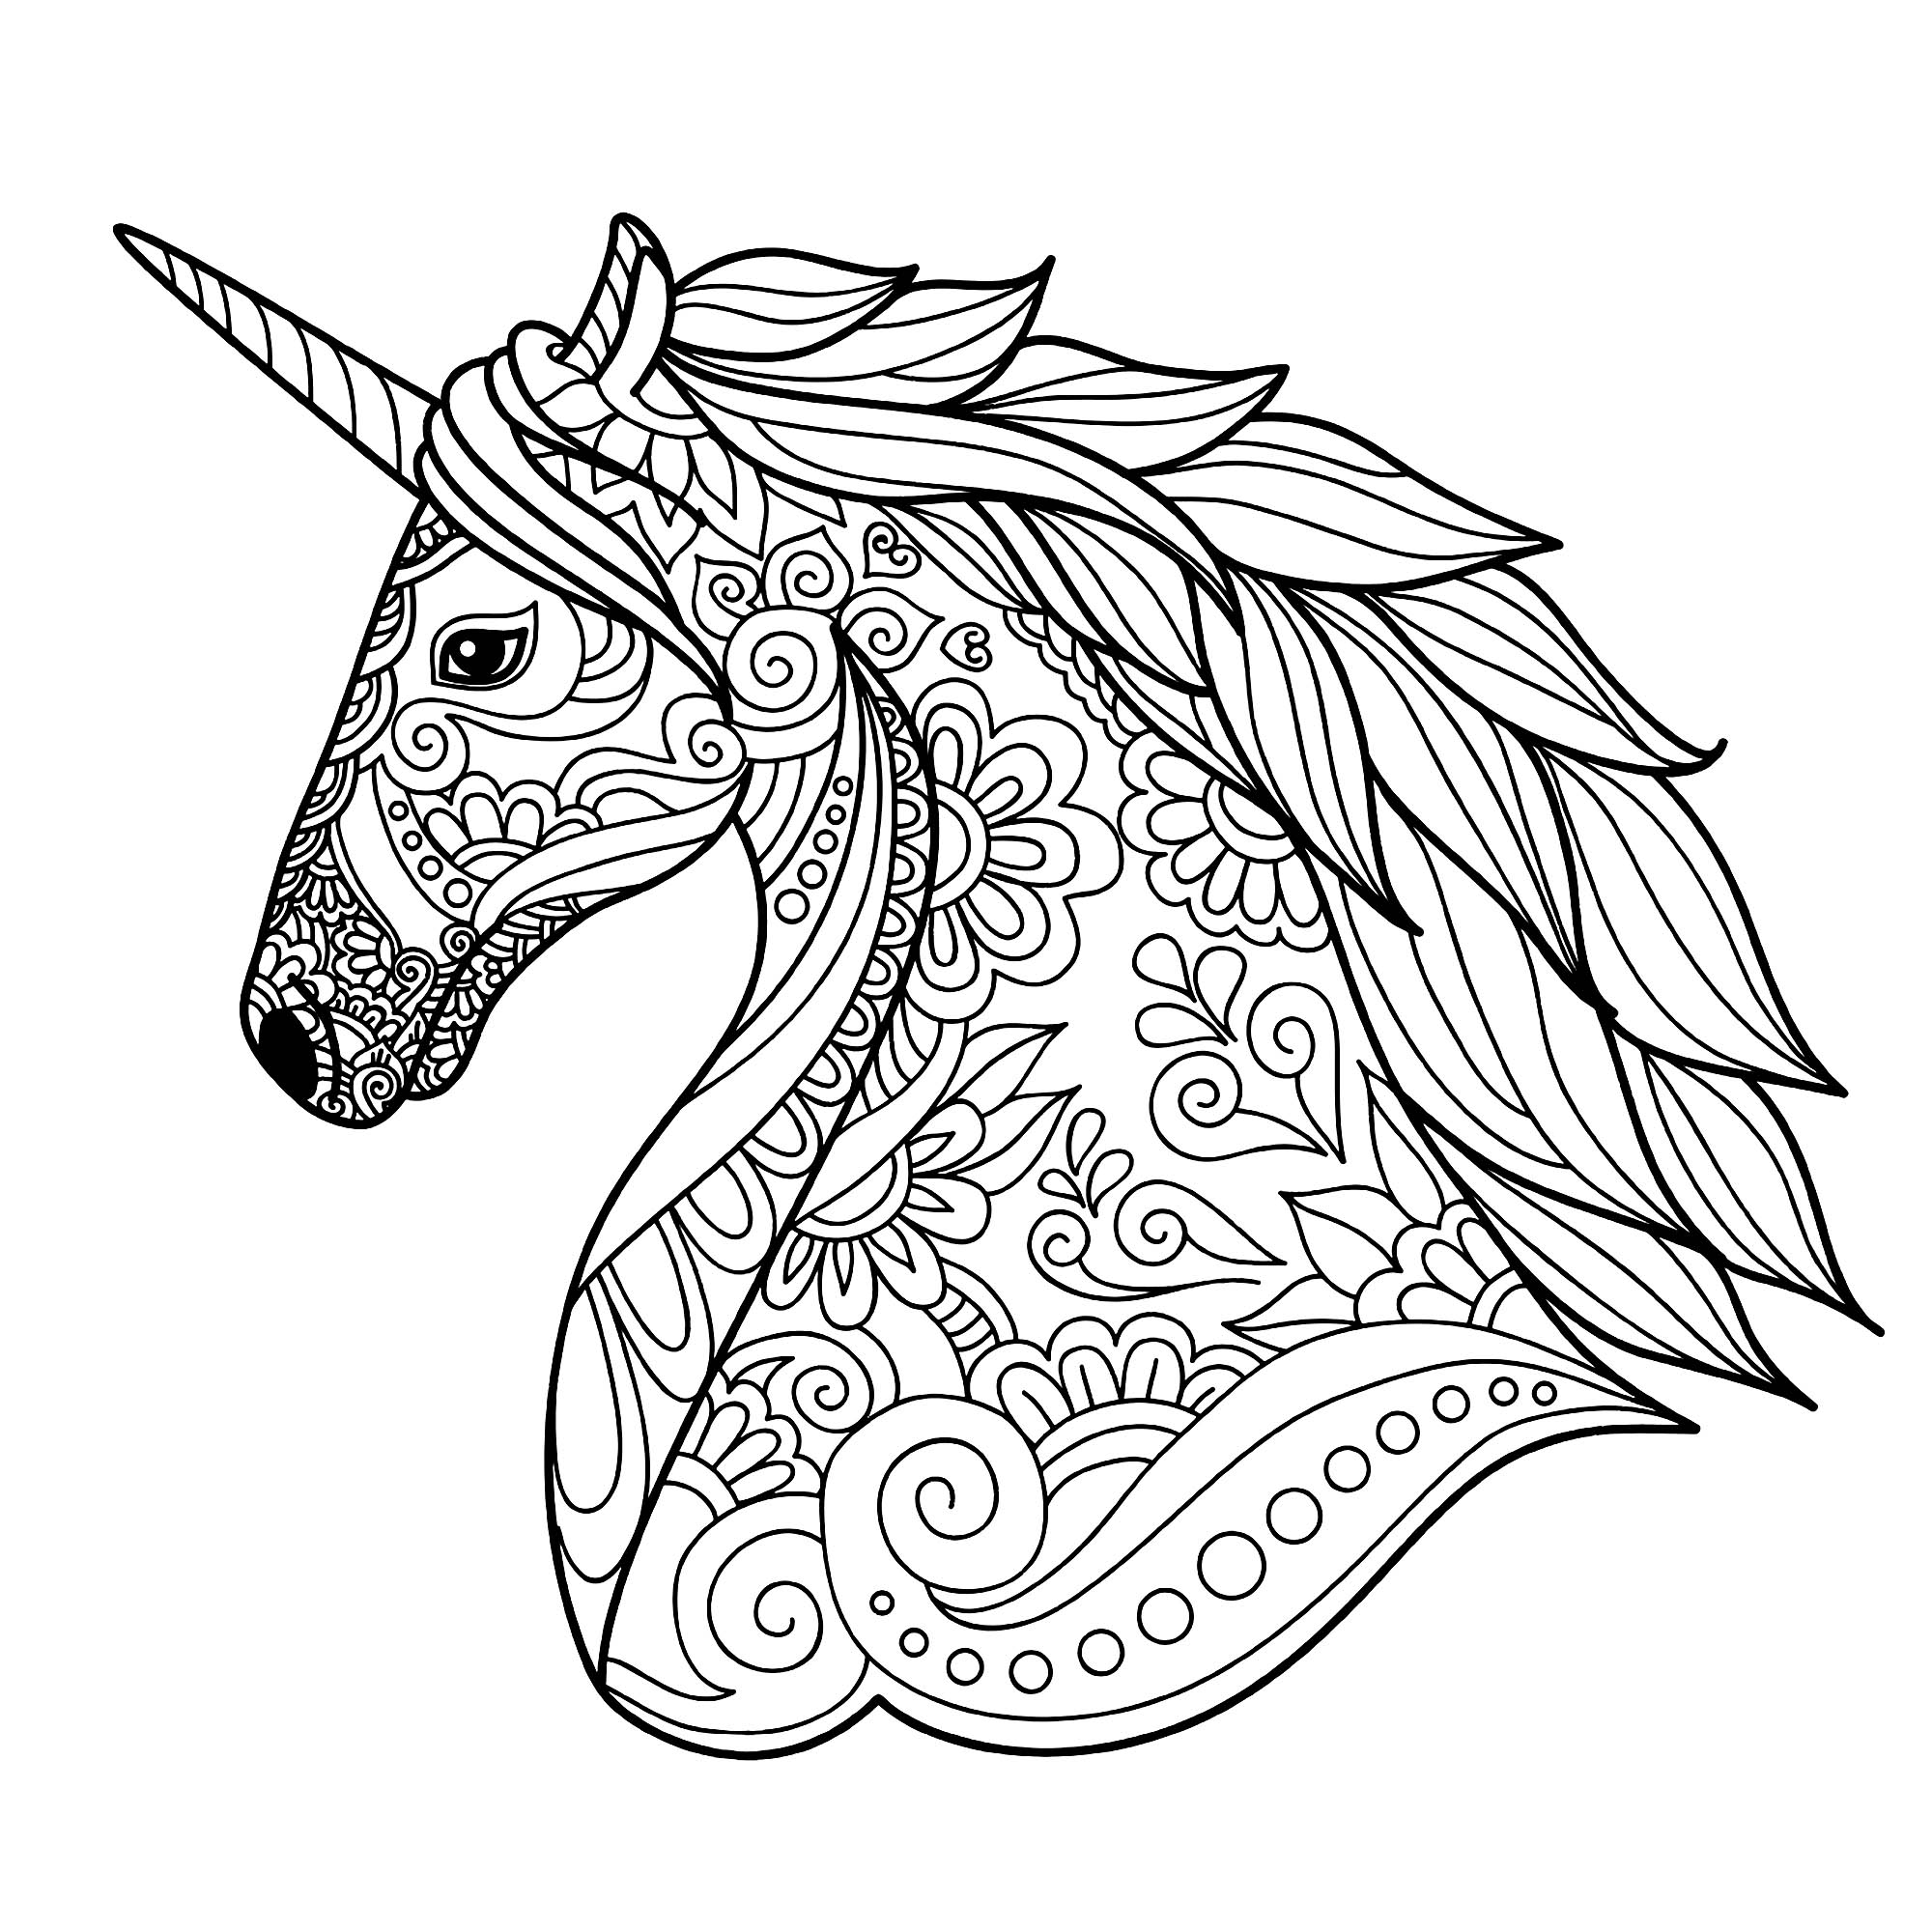 Unicorn's head : simple coloring page, Source : 123rf   Artist : Tierre3012